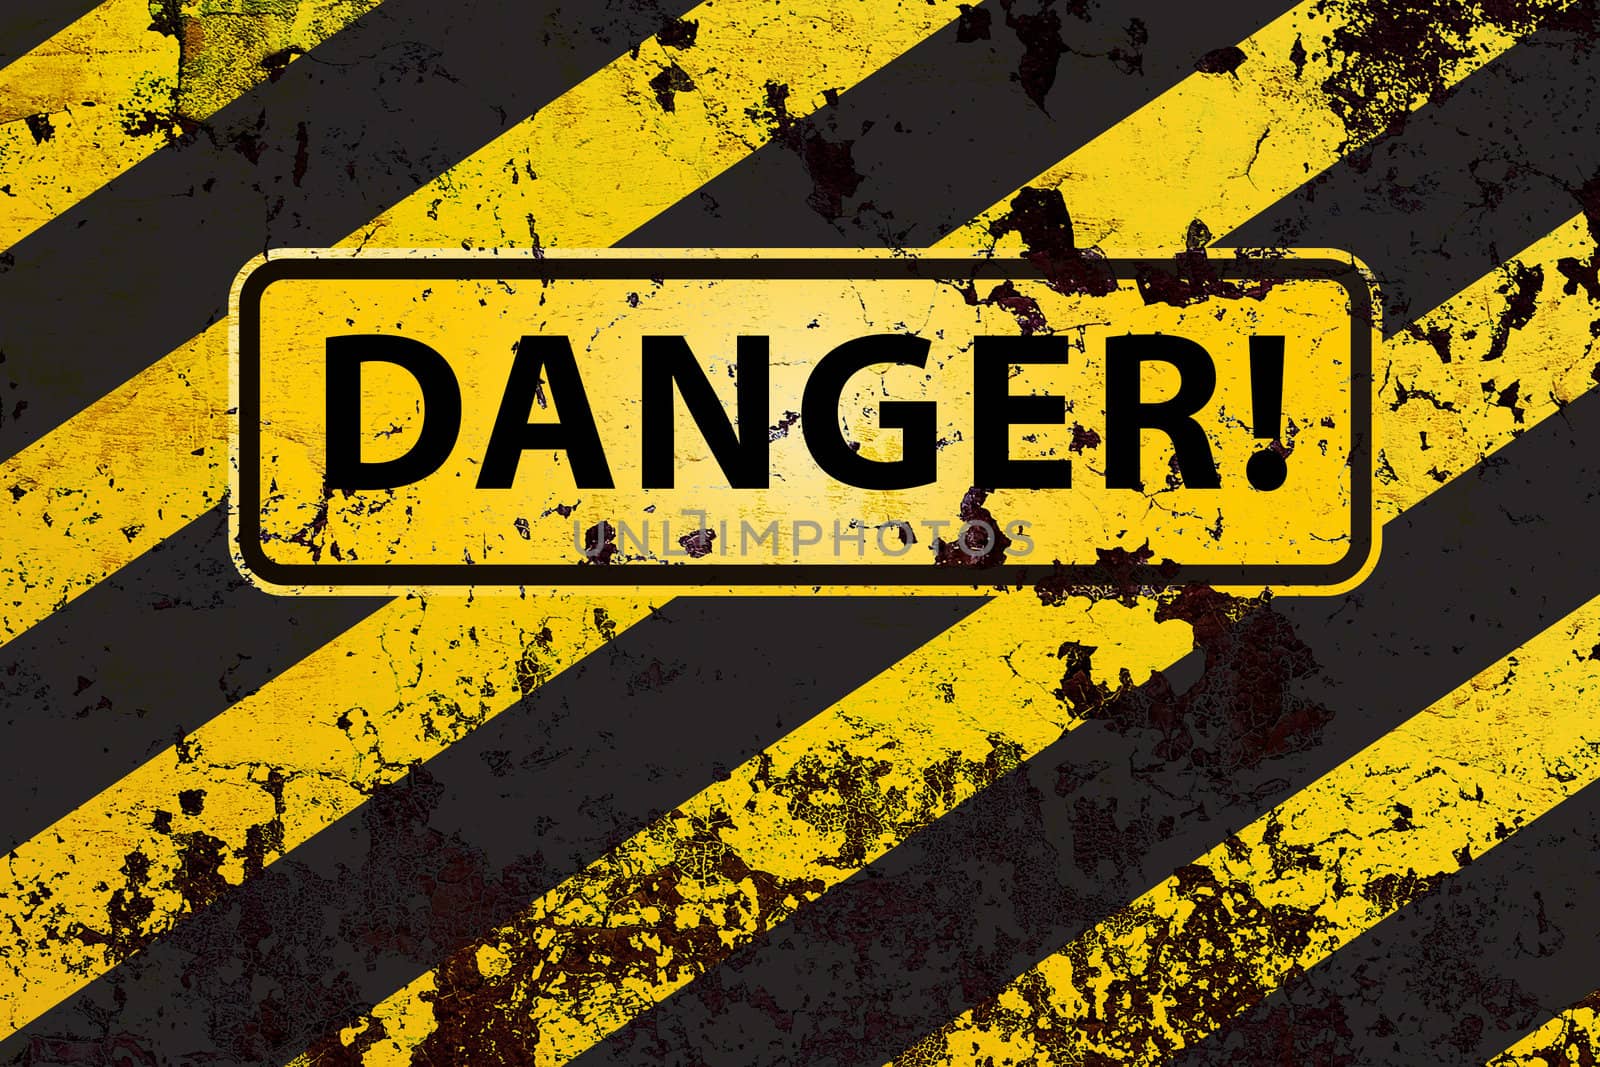 Danger! by timbrk